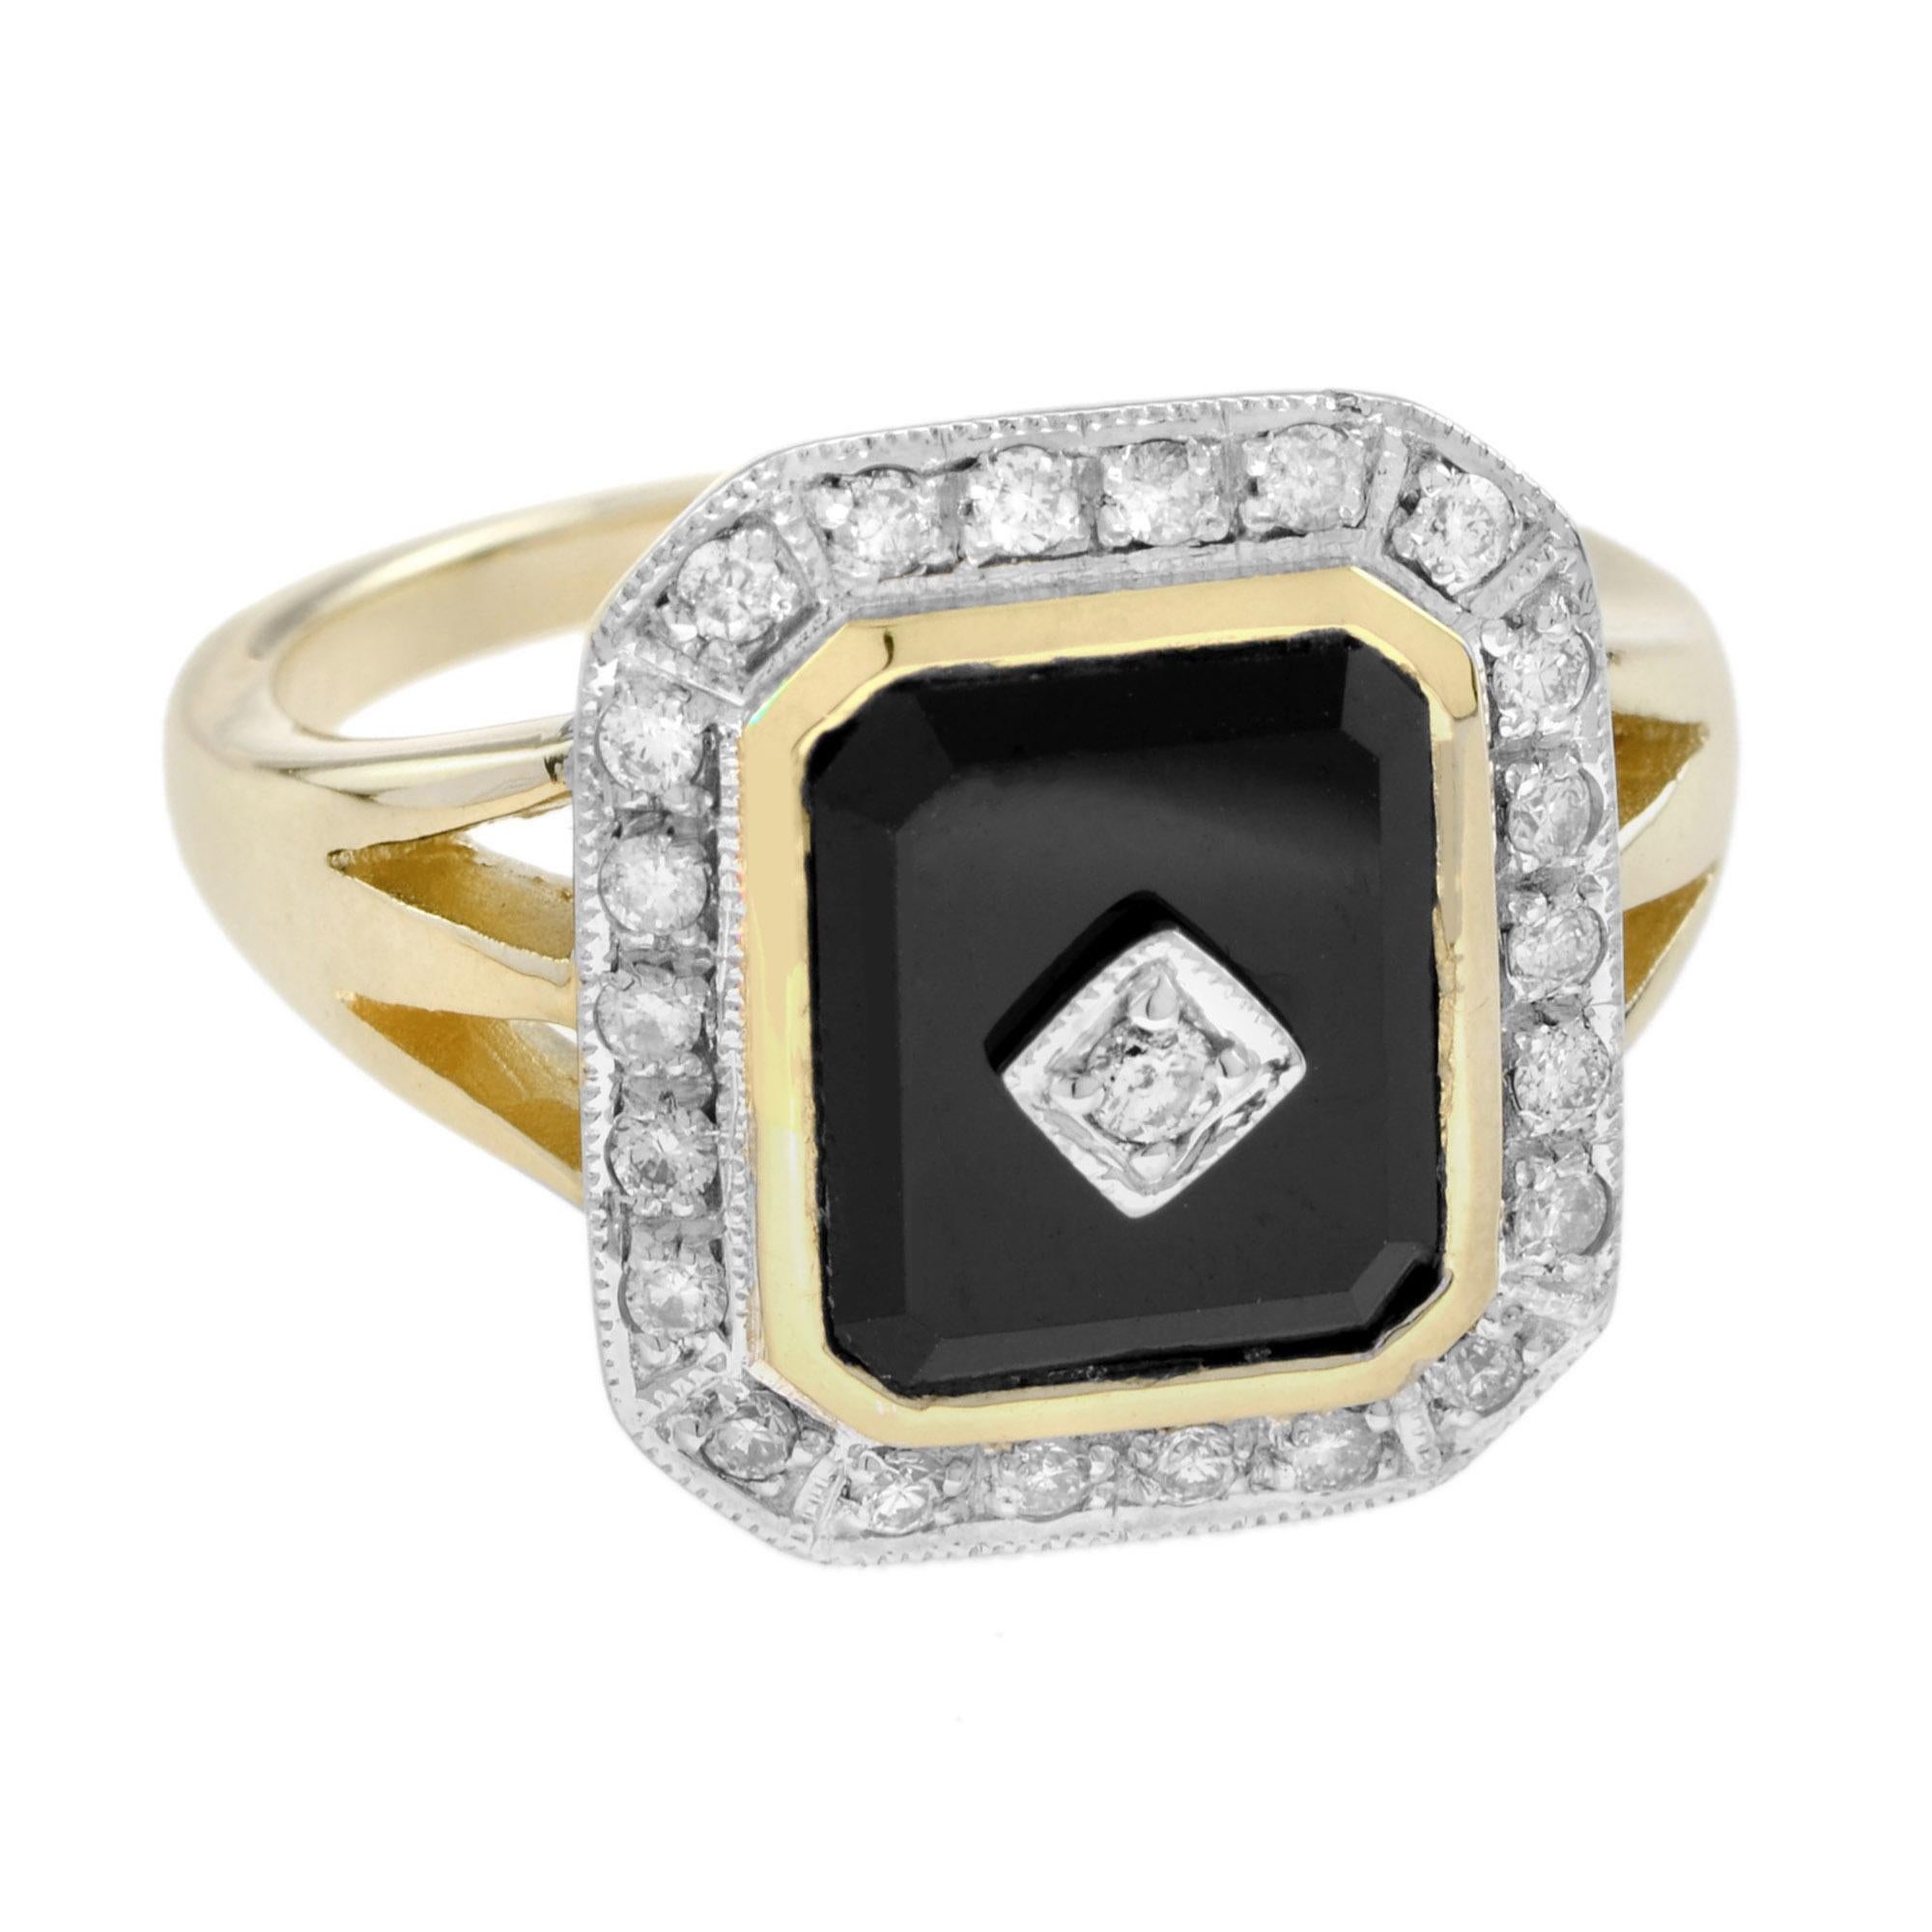 The cushion shape onyx with plaque top with square shaped bezel set diamond, within round diamond border. The shank is split to give the appearance of three rows.

Ring Information
Style: Art-deco
Metal: 9K Yellow Gold
Total weight: 5.82 g. (approx.